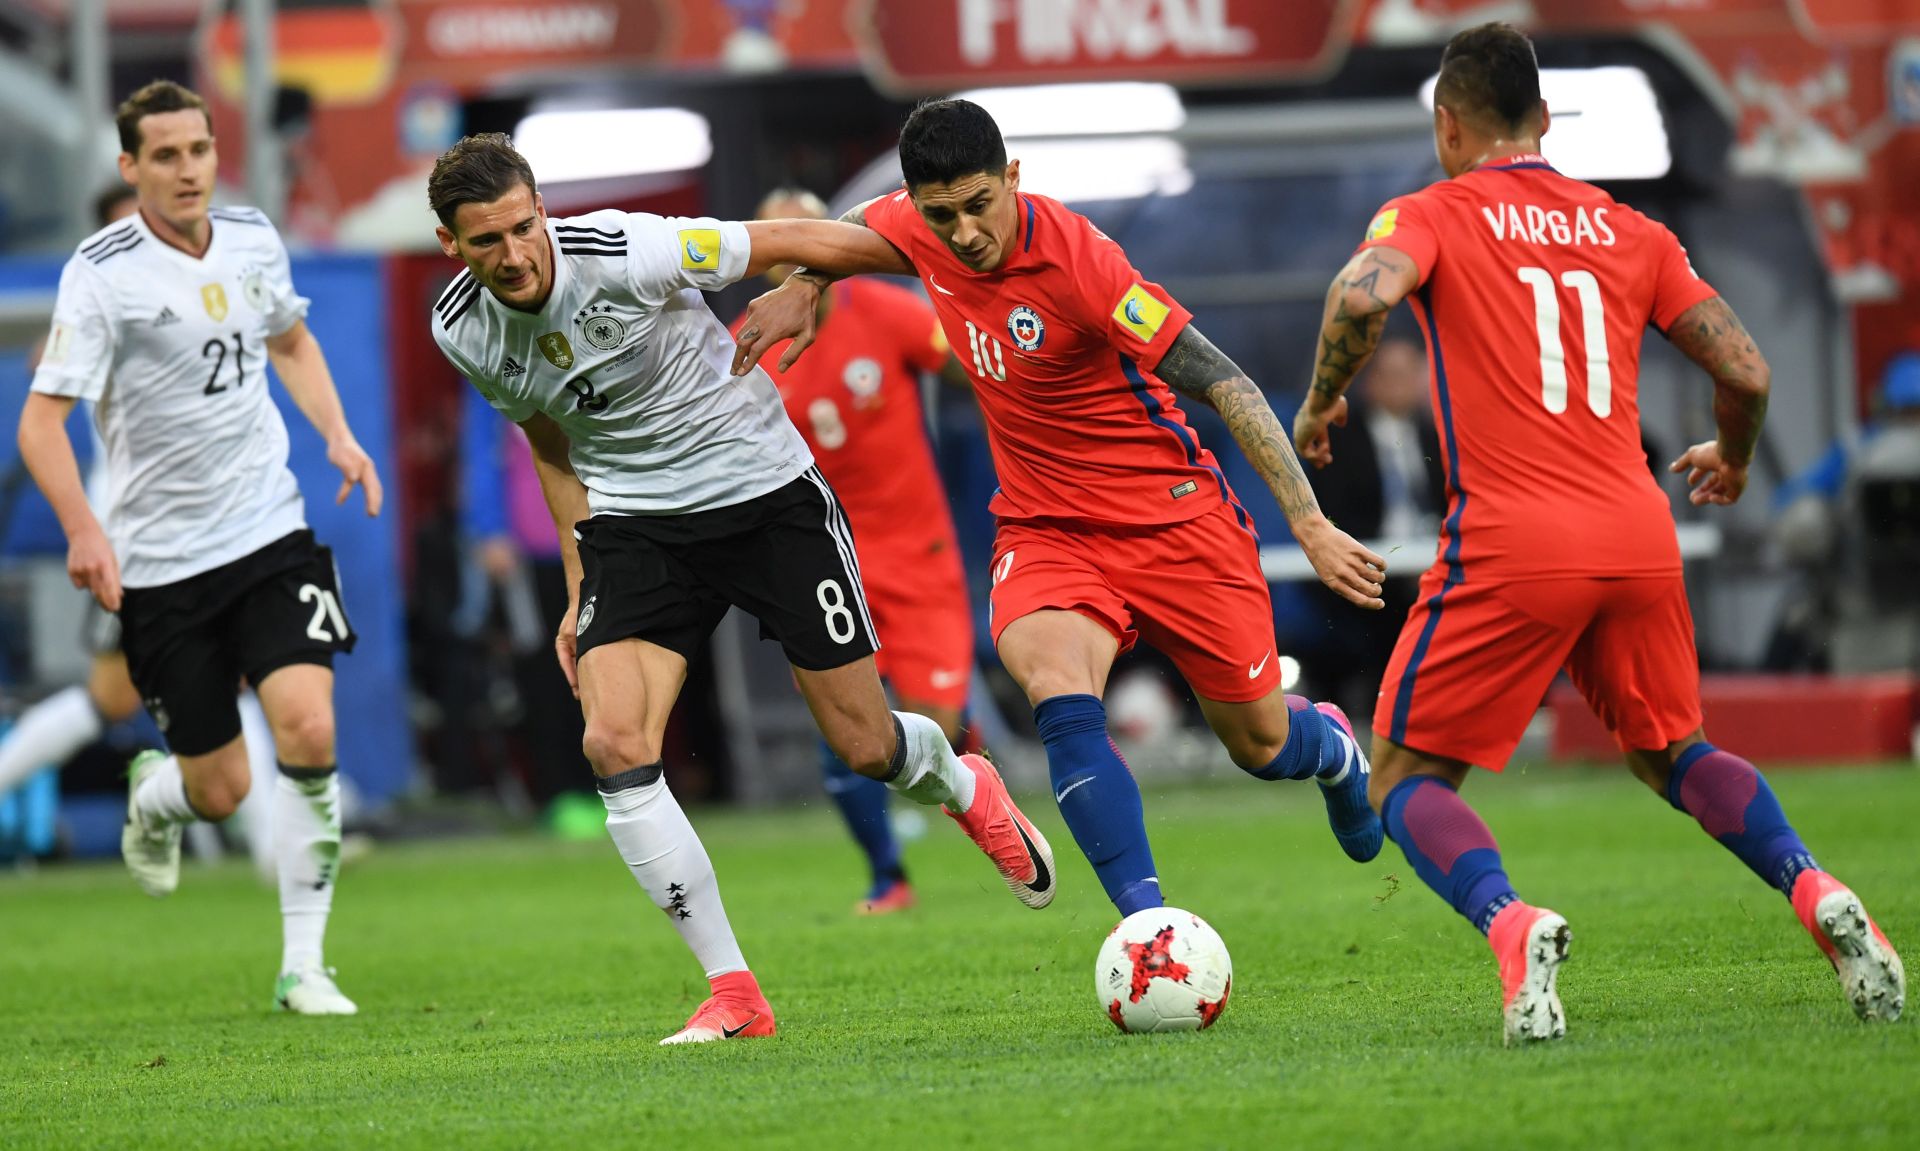 epa06062227 Chile's Pablo Hernandez (2-R) in action against Germany's Leon Goretzka (2-L) during the FIFA Confederations Cup 2017 final match between Chile and Germany at the Saint Petersburg stadium in St.Petersburg, Russia, 02 July 2017.  EPA/GEORGI LICOVSKI